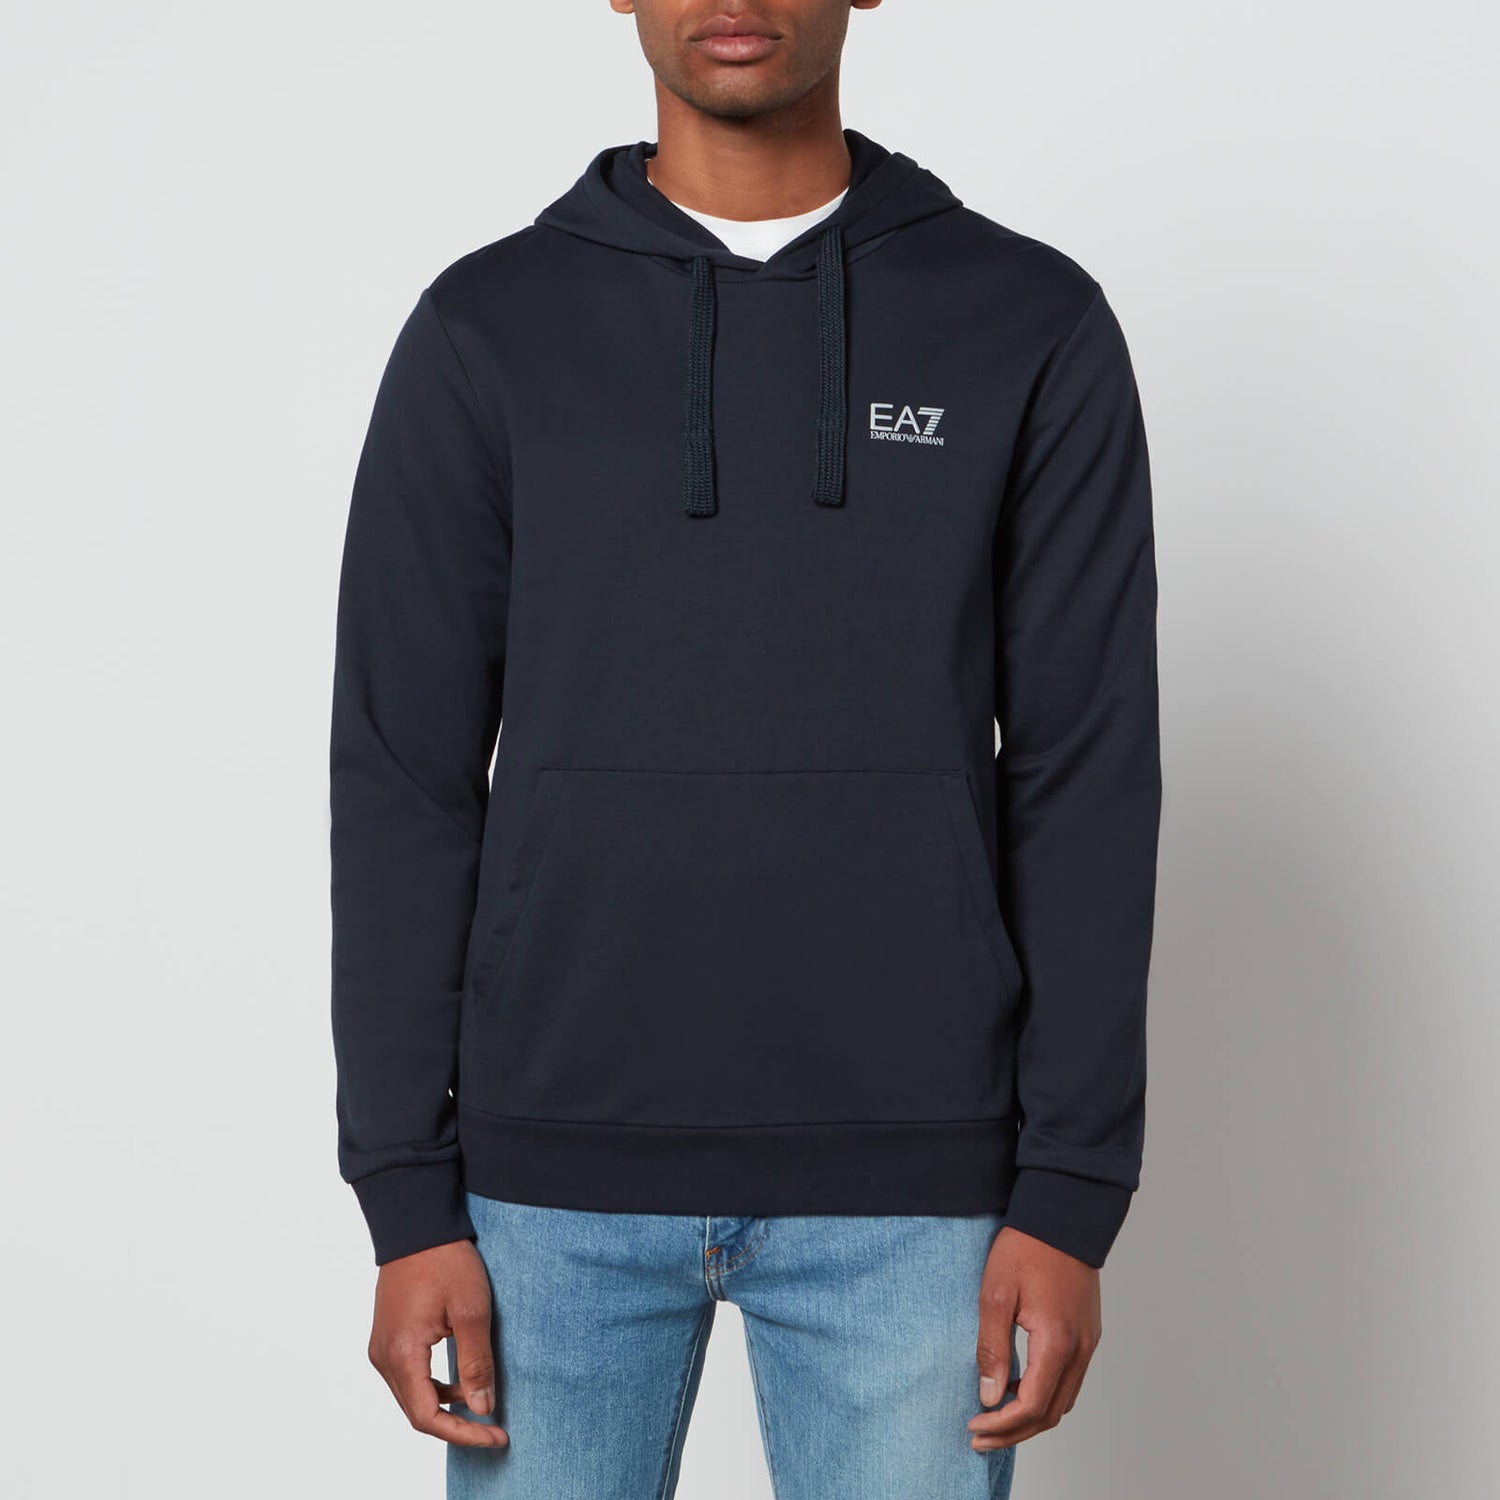 EA7 Men's Core Identity French Terry Hoodie - Night Blue - XL